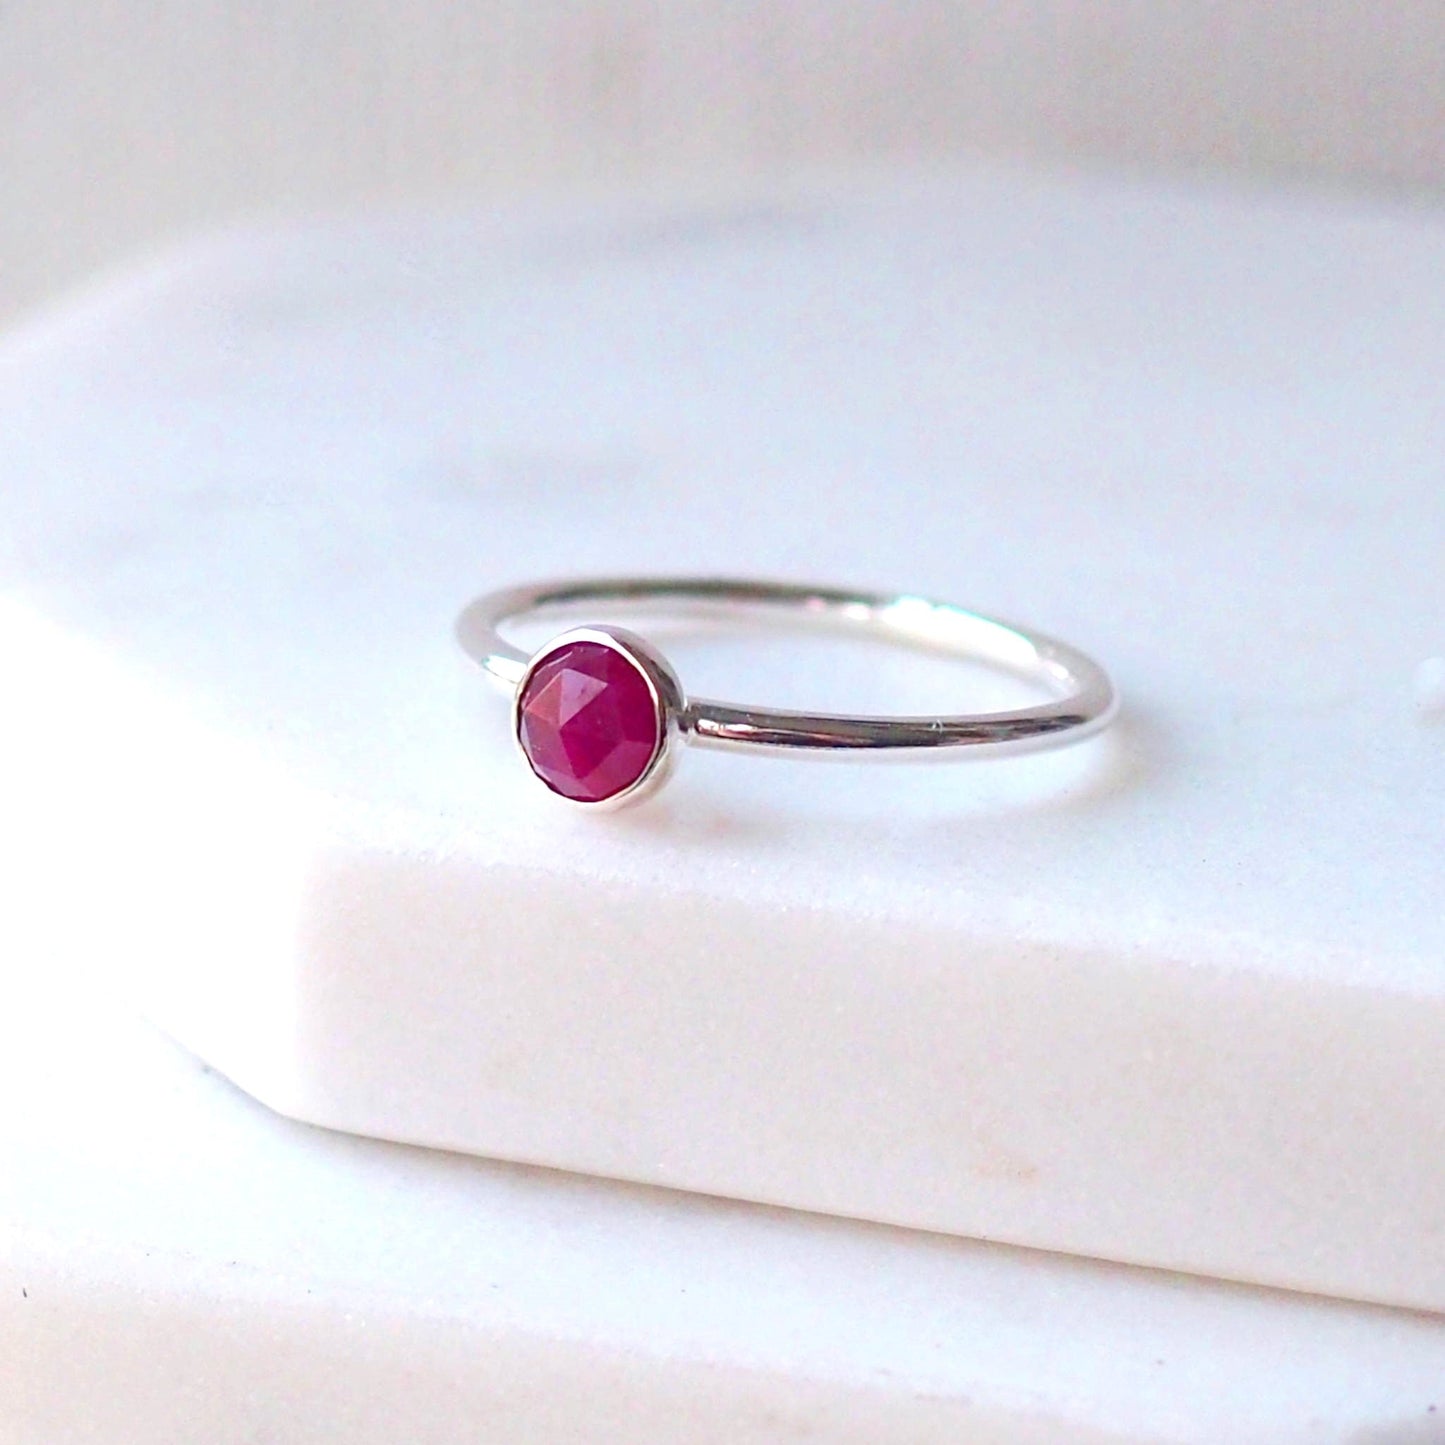 Red Ruby round gemstone ring in Sterling Silver pictured against a white marble background. The ring in minimalist in style with a round facet cut ruby in a 5mm size. Handmade by maram jewellery in Edinburgh UK